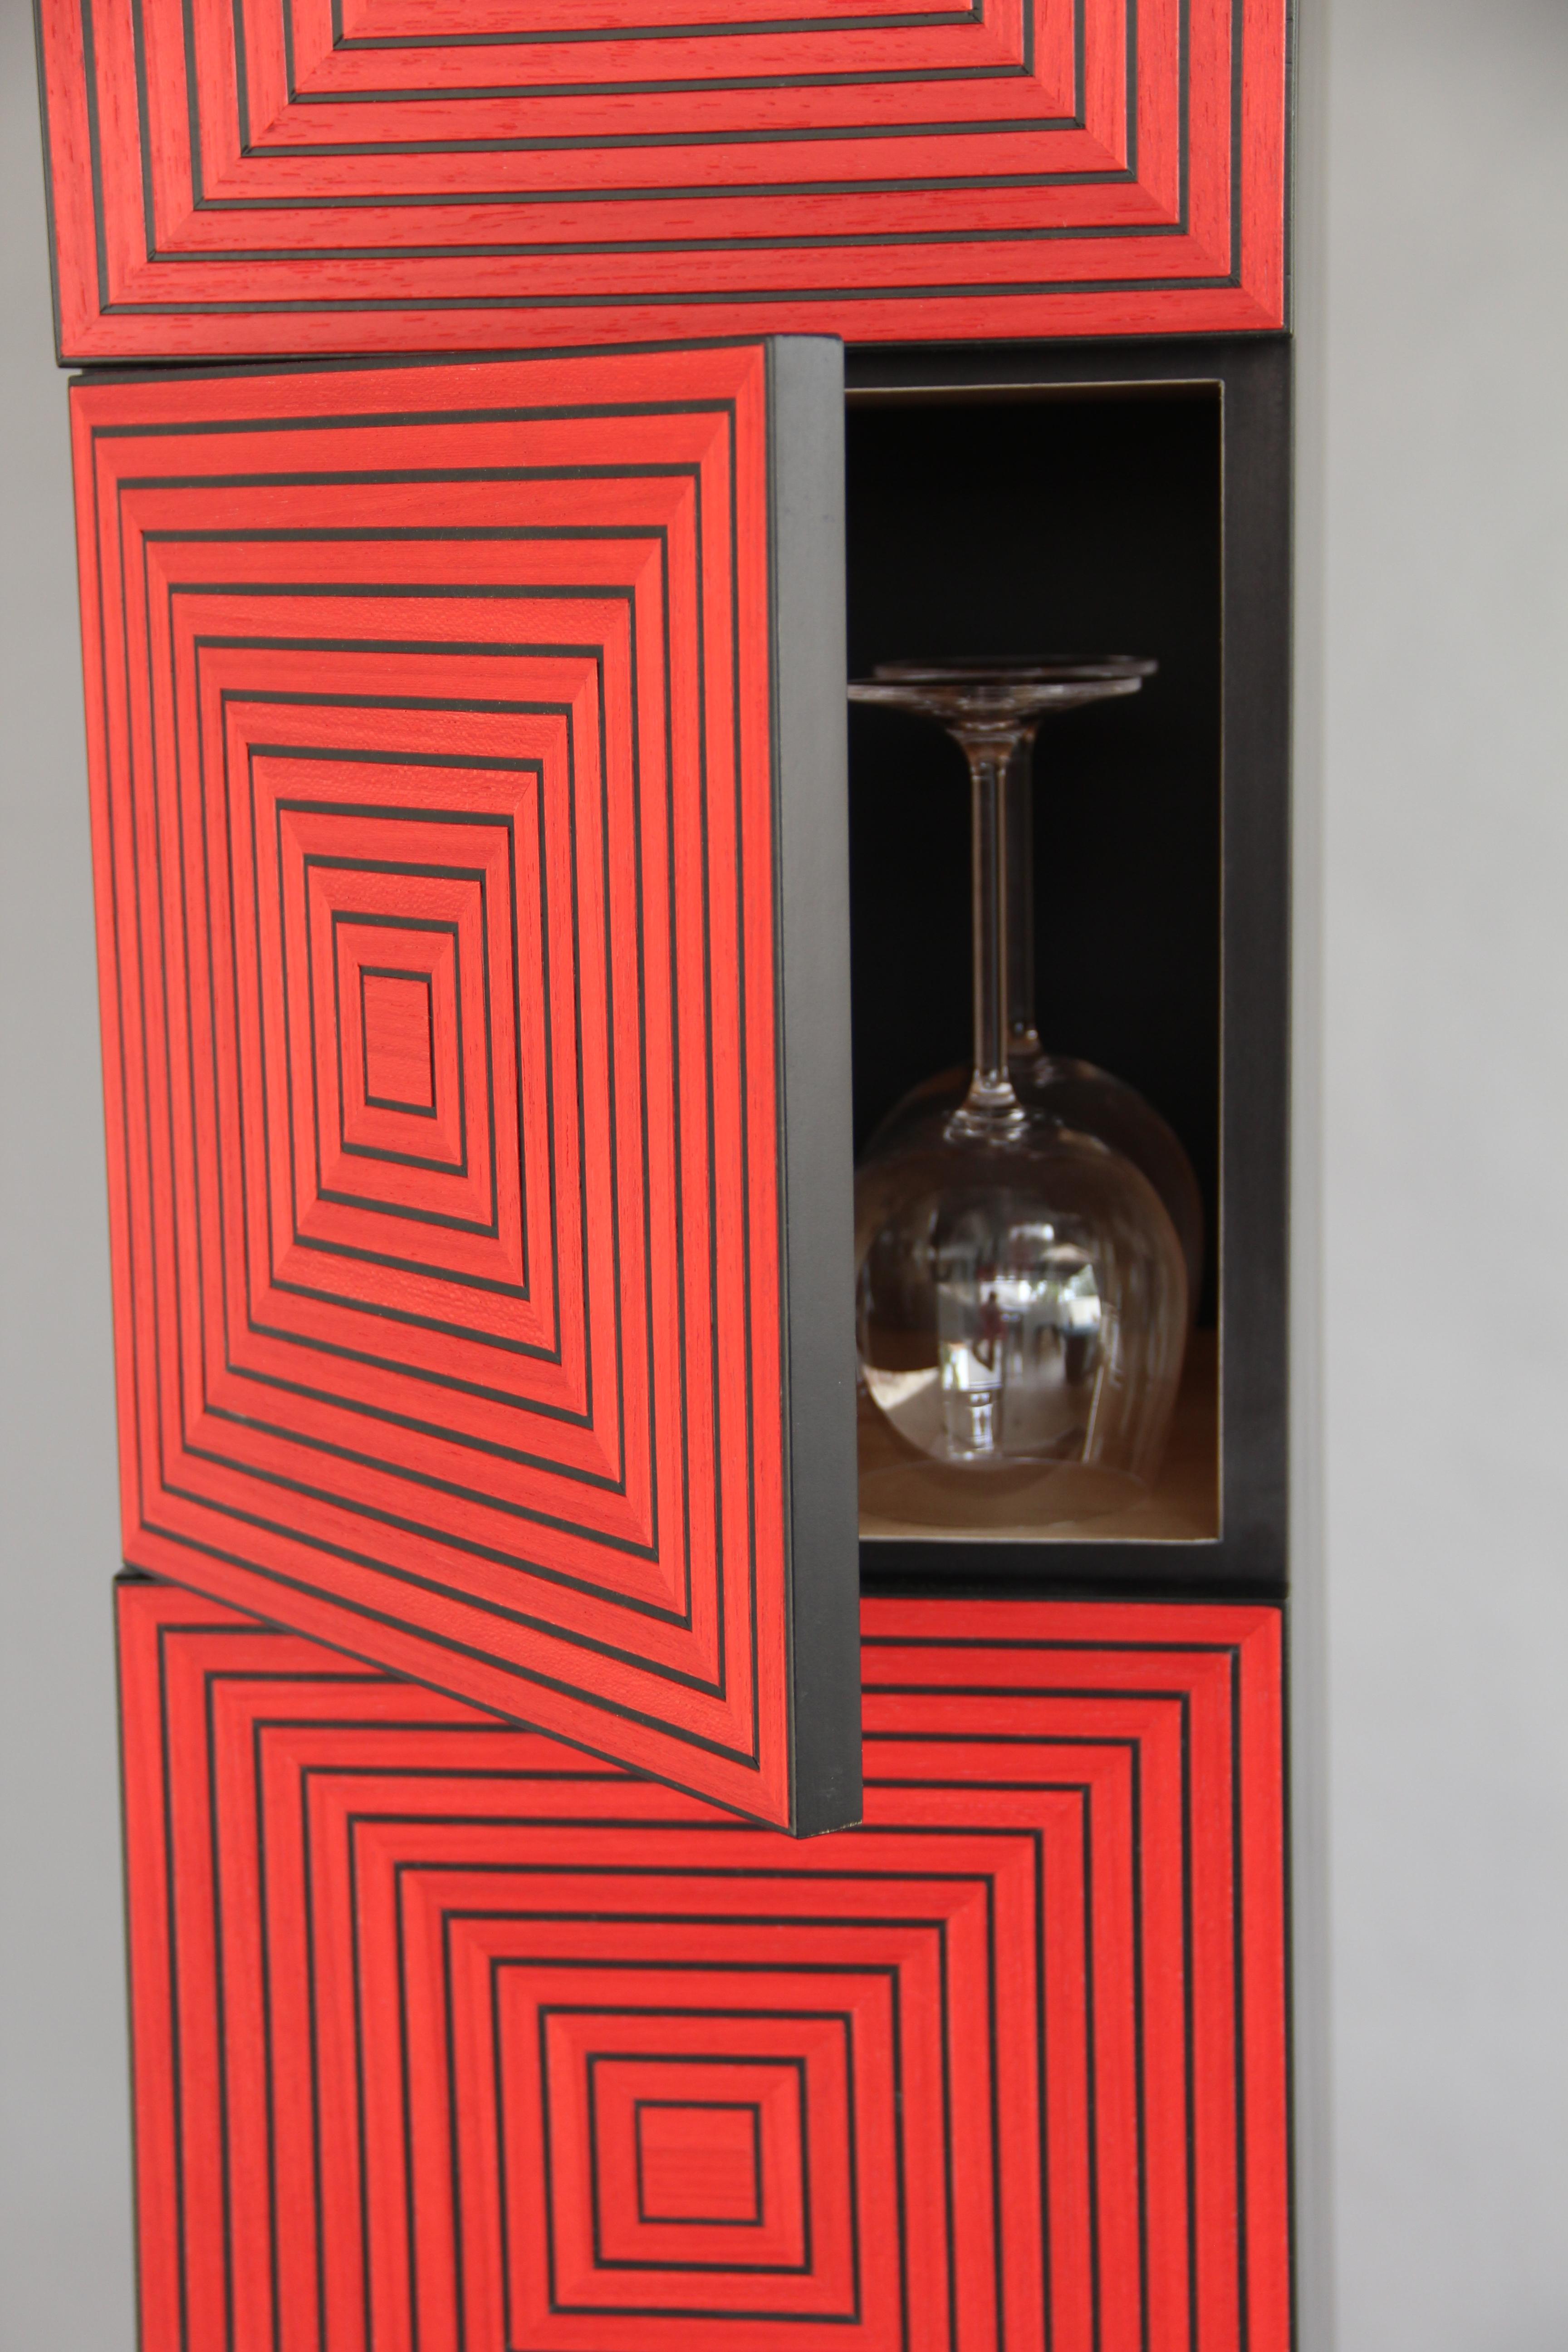 The Maze Tower is a five-door vertical cabinet with an intricate pattern of veneer strips that are individually hand cut and applied by the artist. Each door front is created from 44 pieces of veneer that produce an optical effect due to light